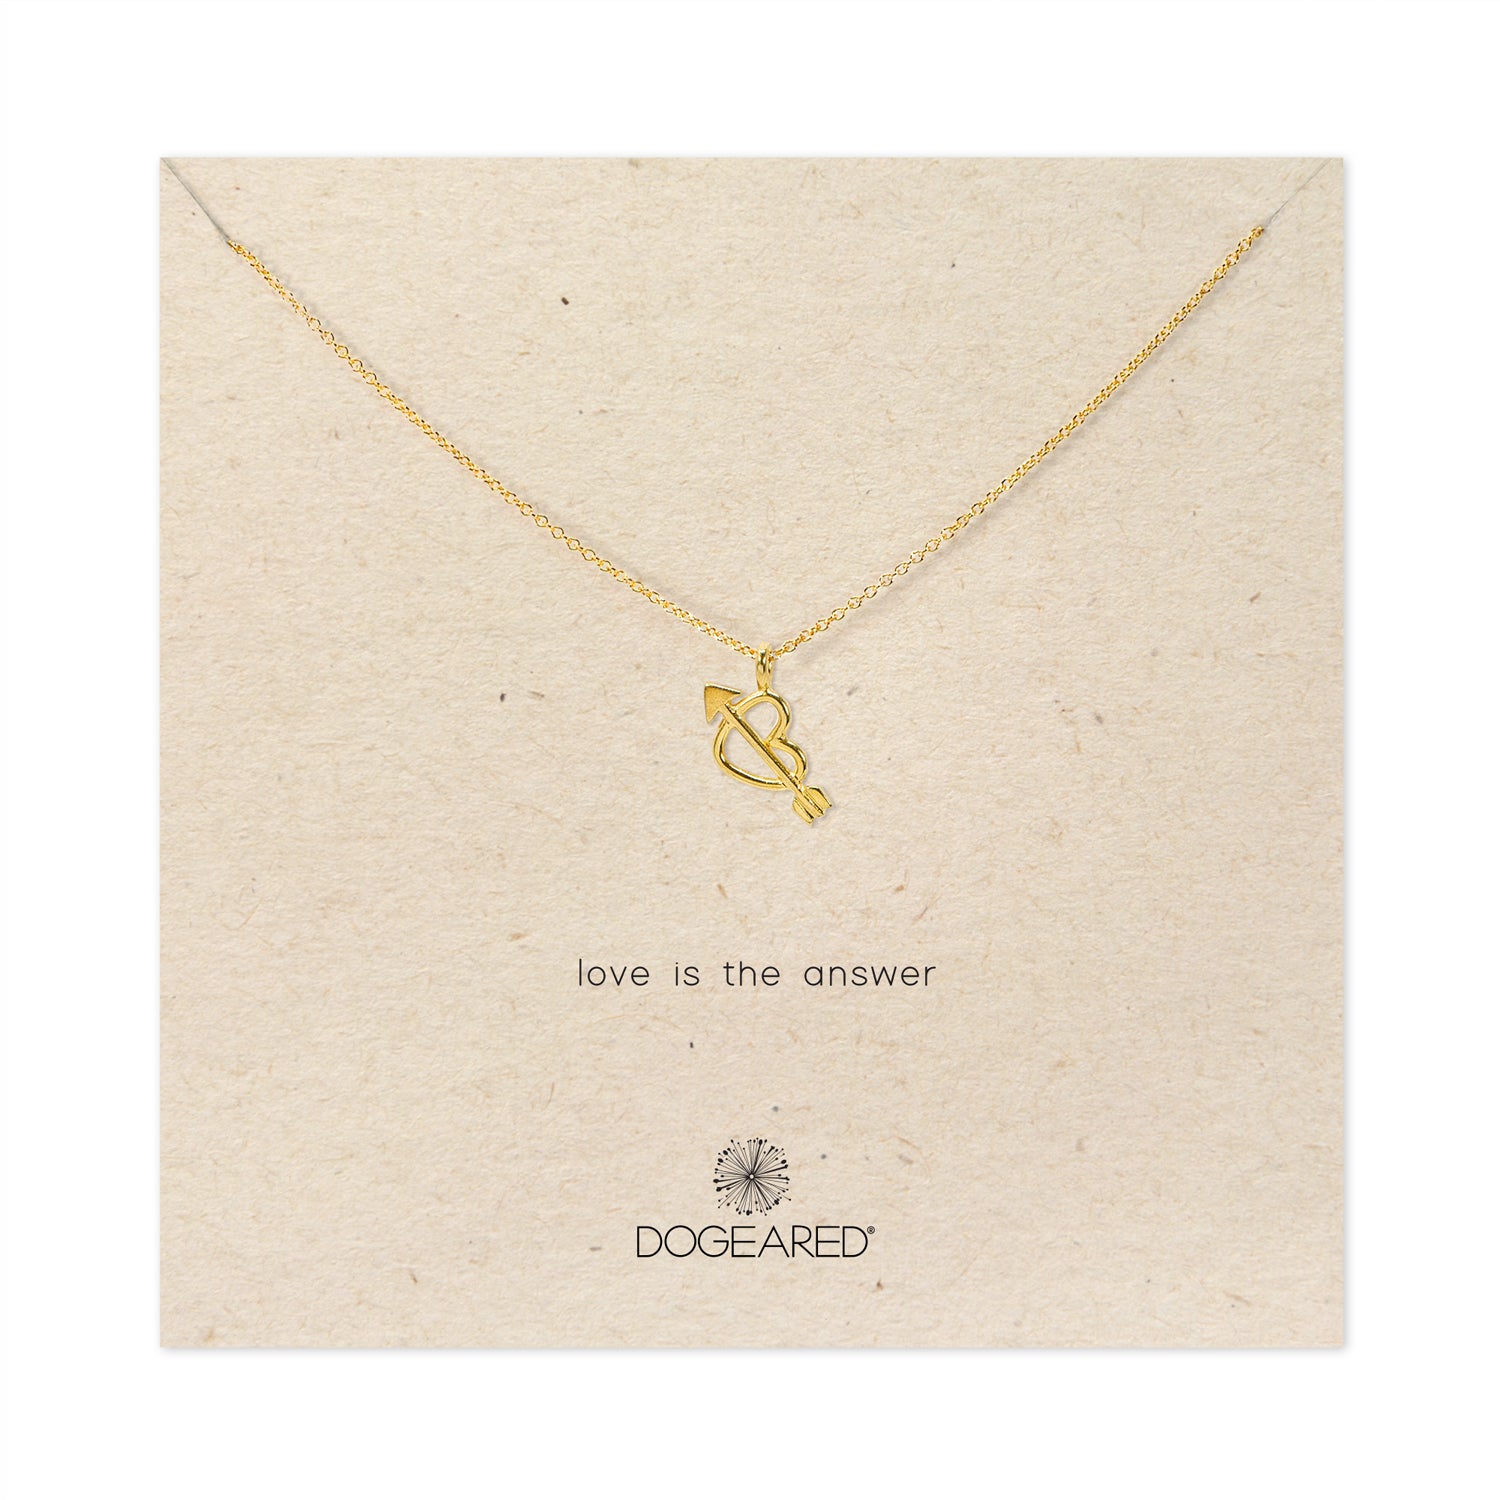 Love is the answer heart and arrow necklace